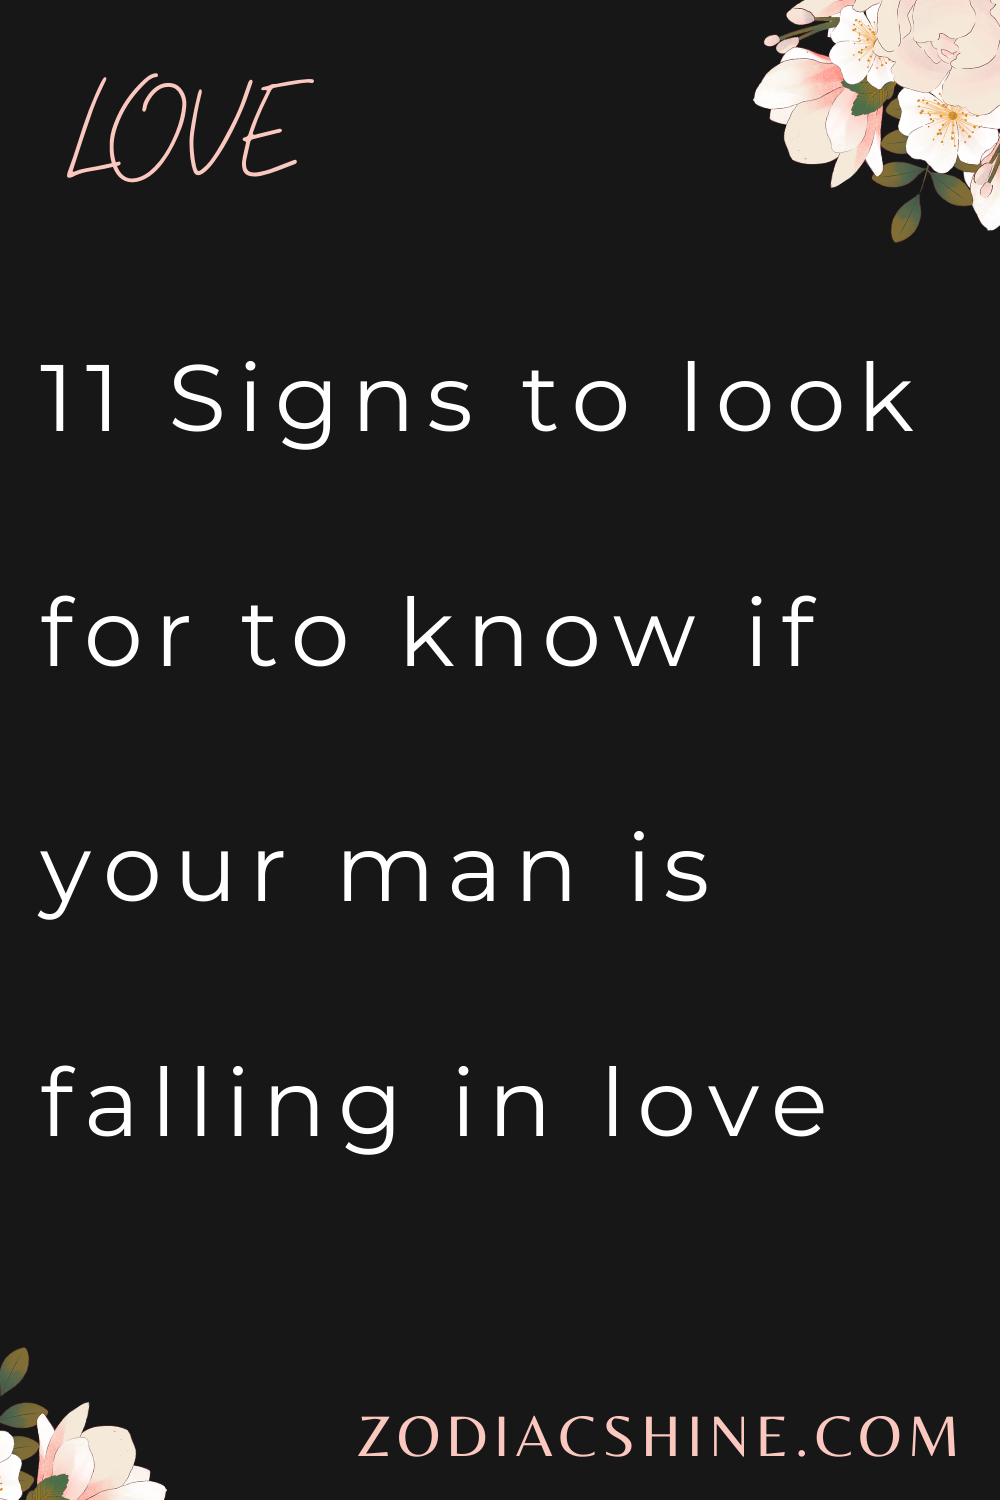 11 Signs to look for to know if your man is falling in love